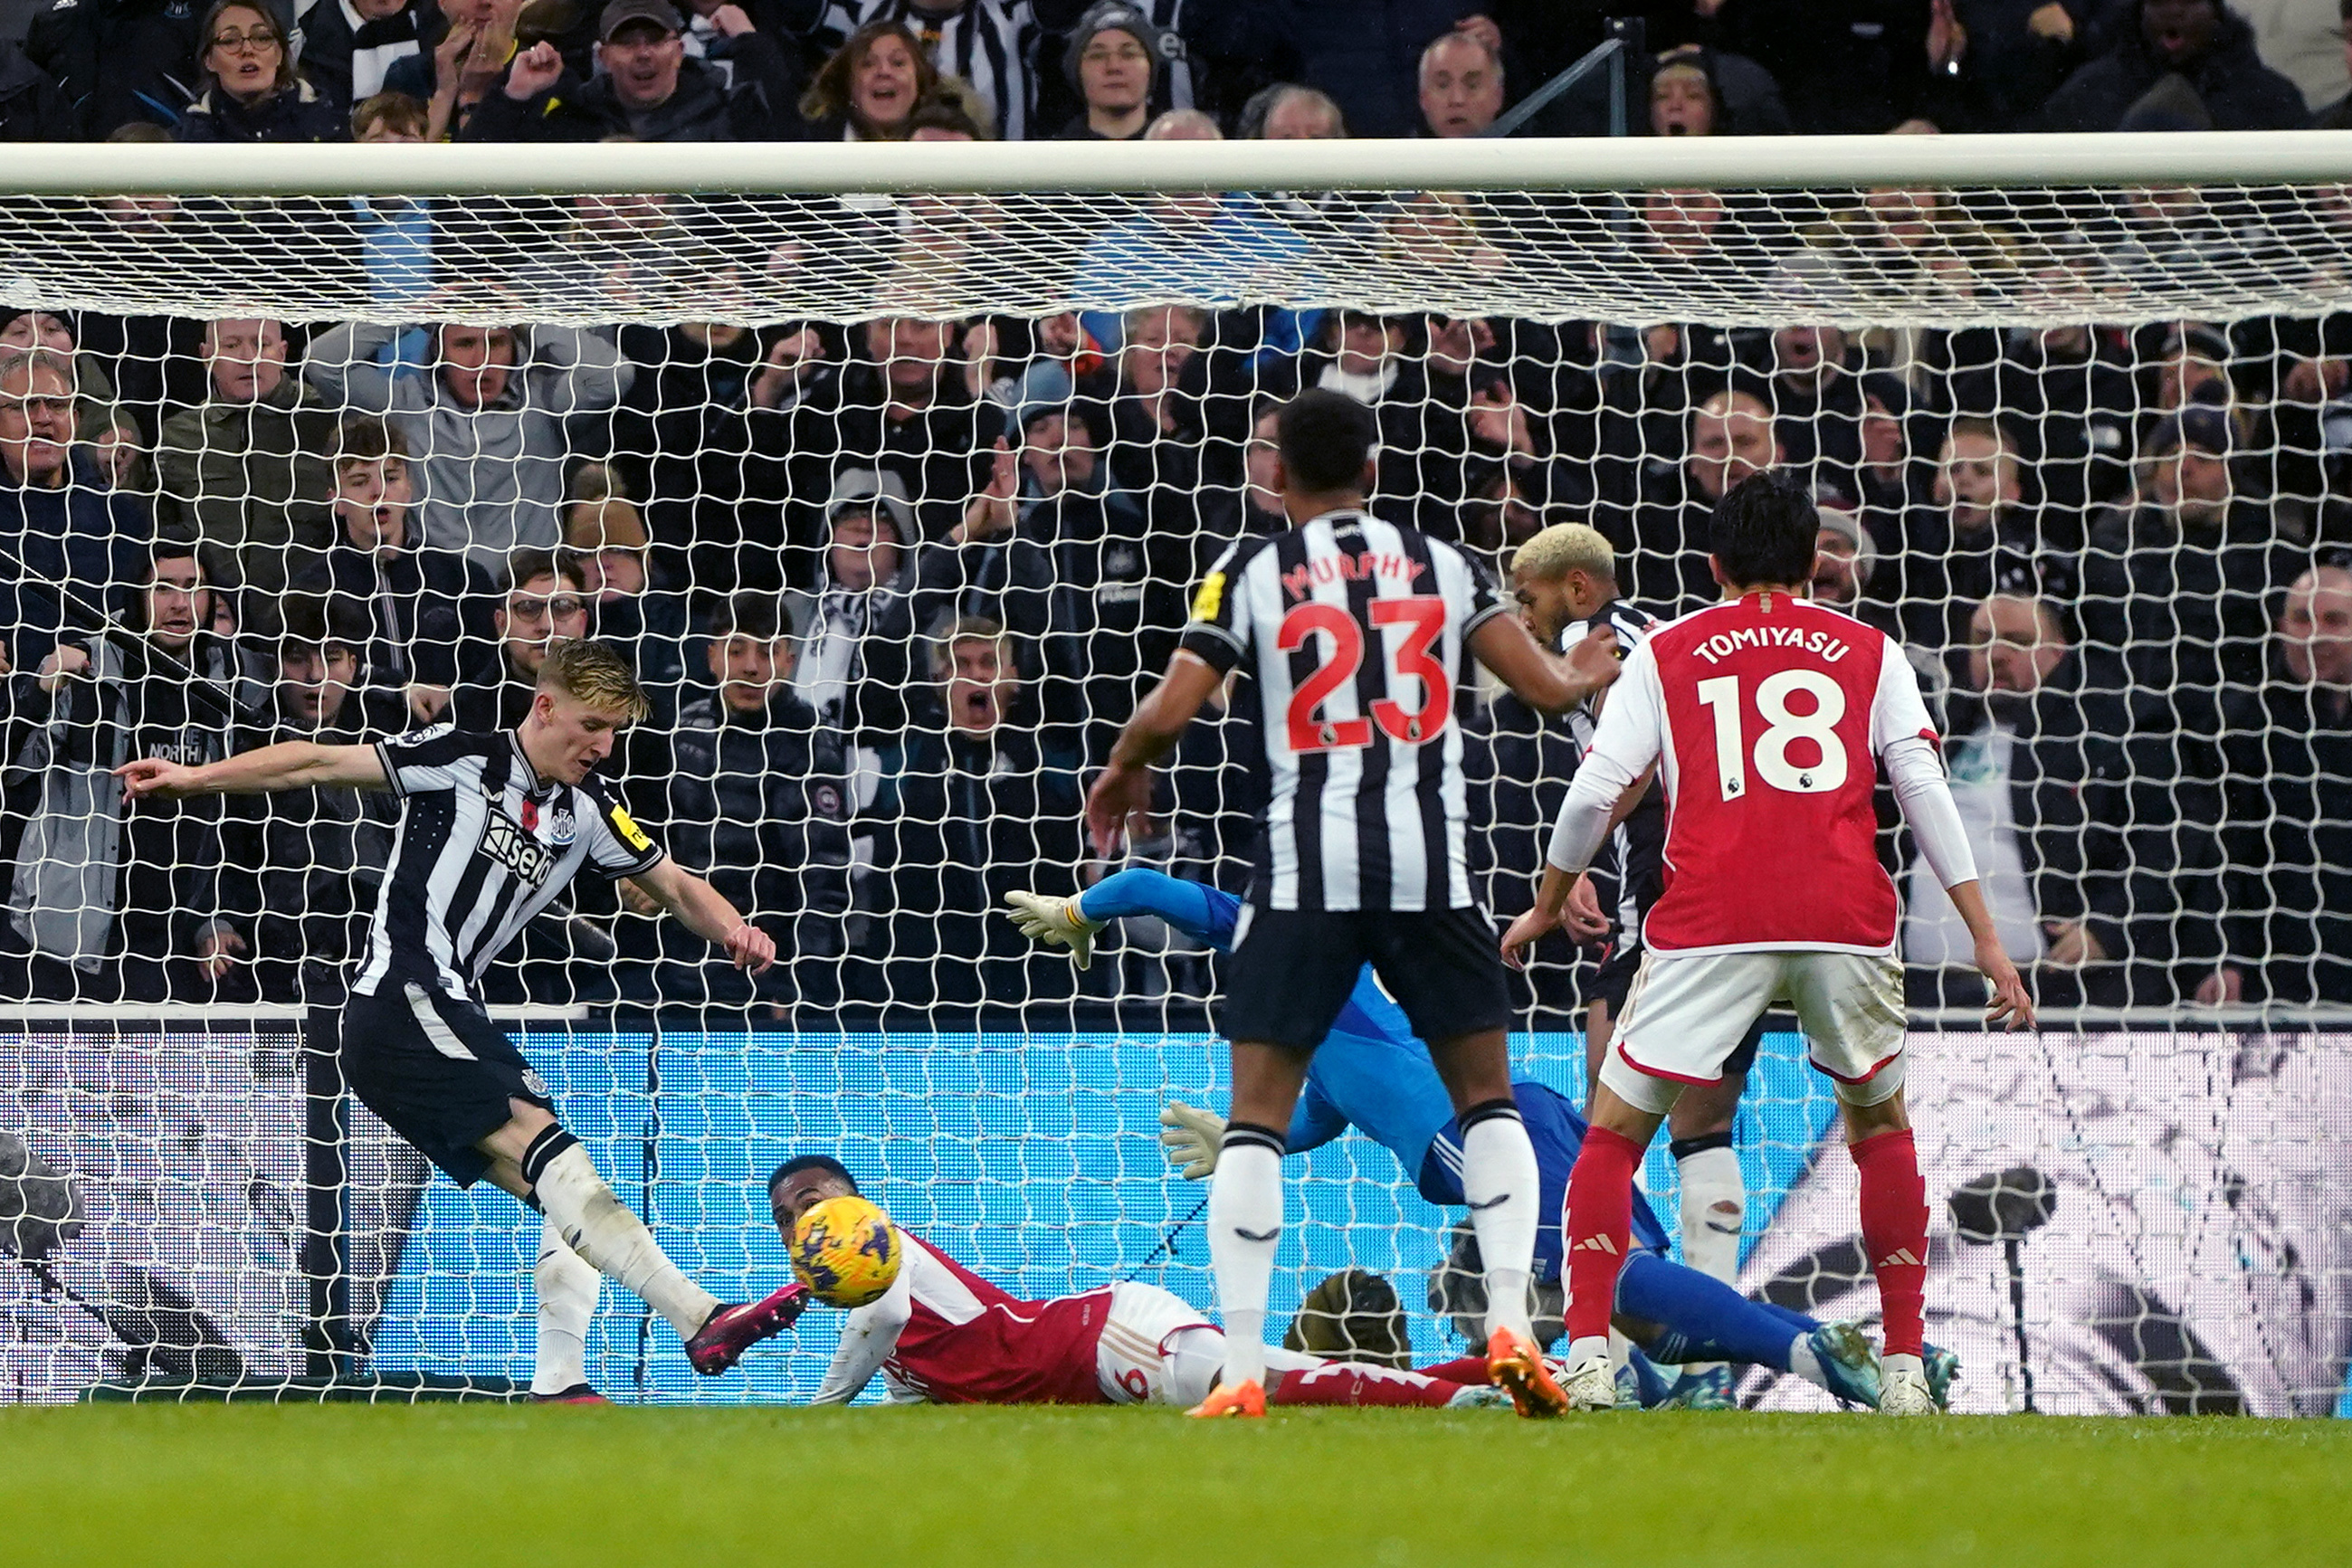 Newcastle United’s Anthony Gordon bundled home the controversial winner against Arsenal